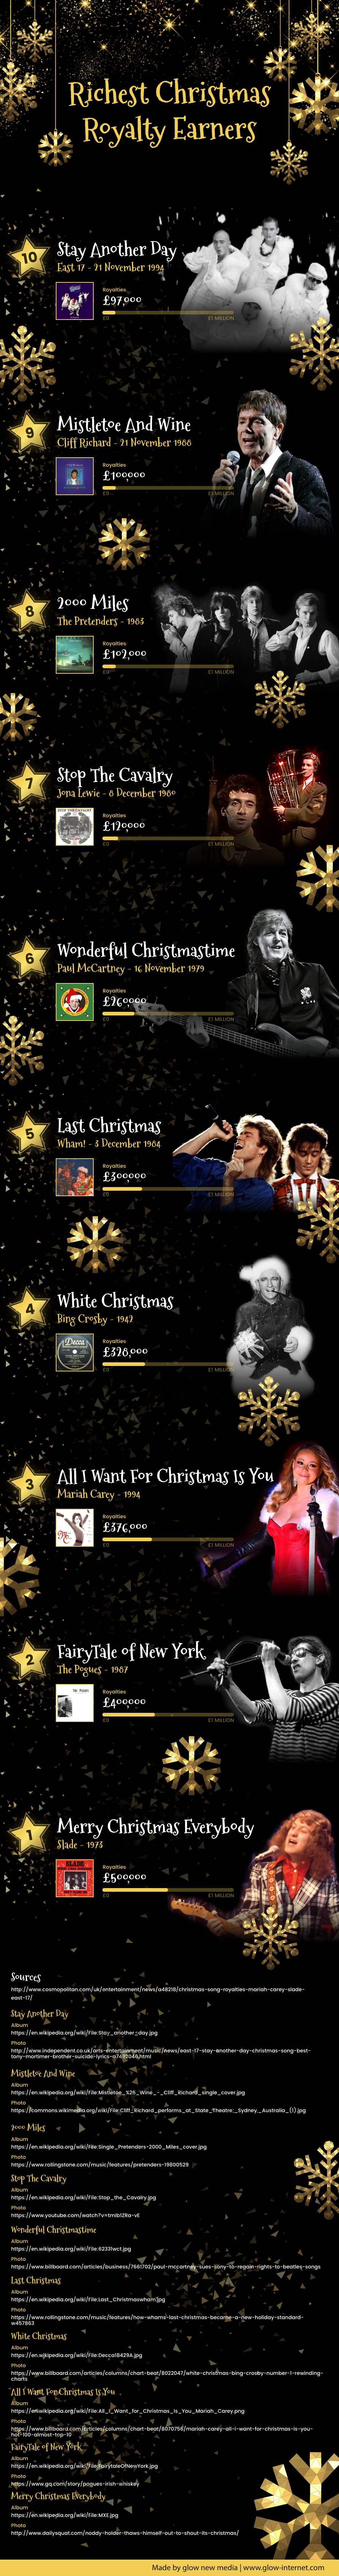 Richest Christmas Royalty Earners